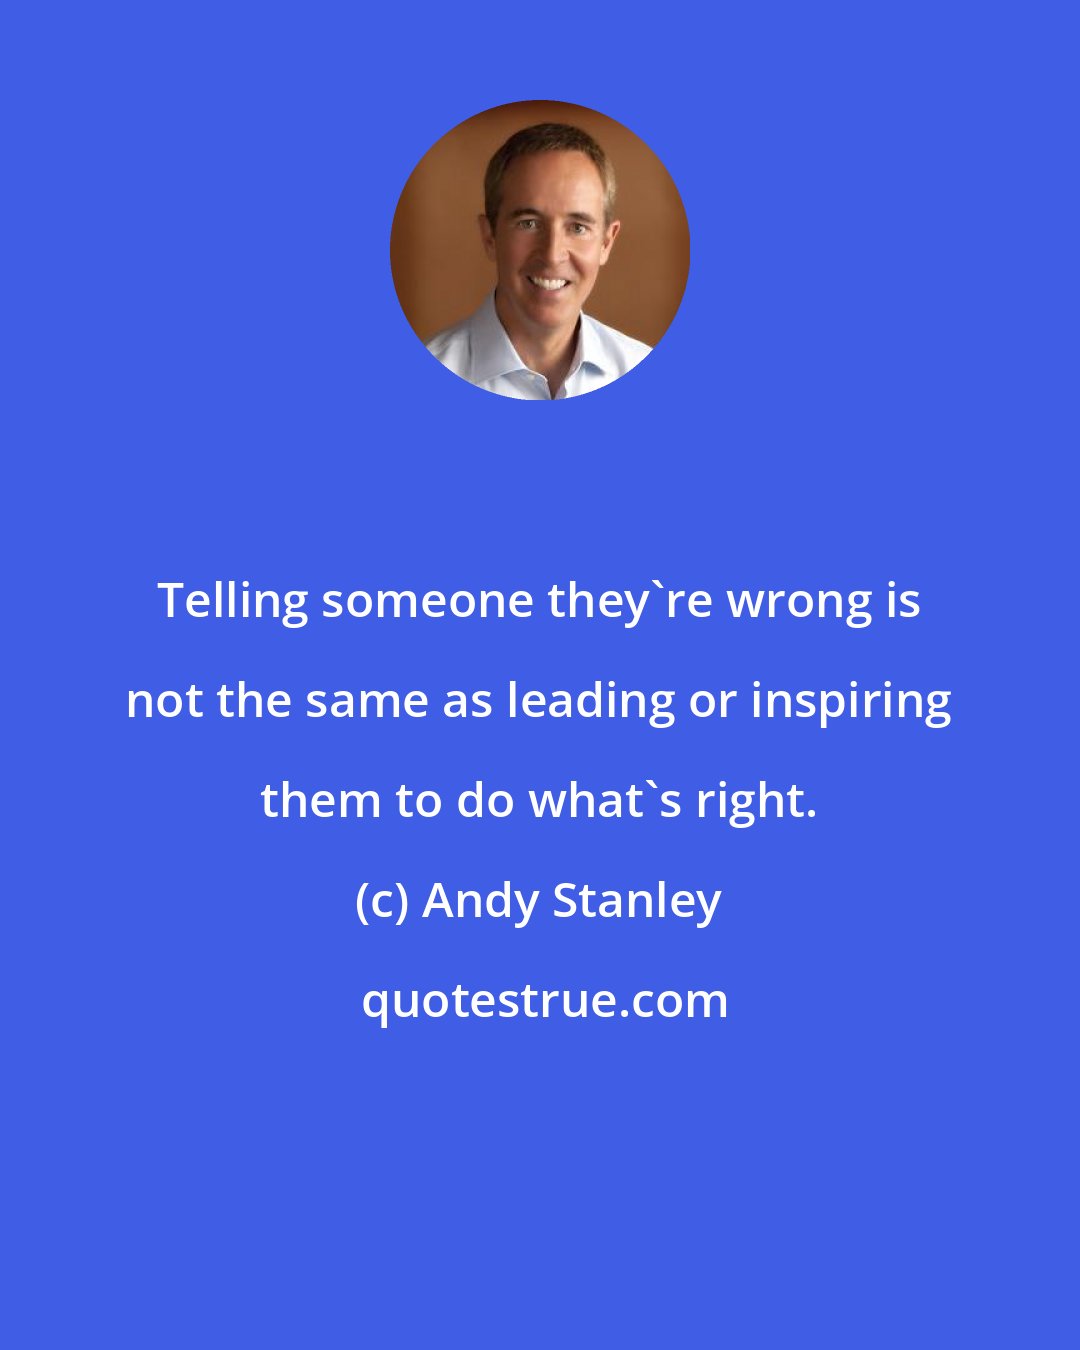 Andy Stanley: Telling someone they're wrong is not the same as leading or inspiring them to do what's right.